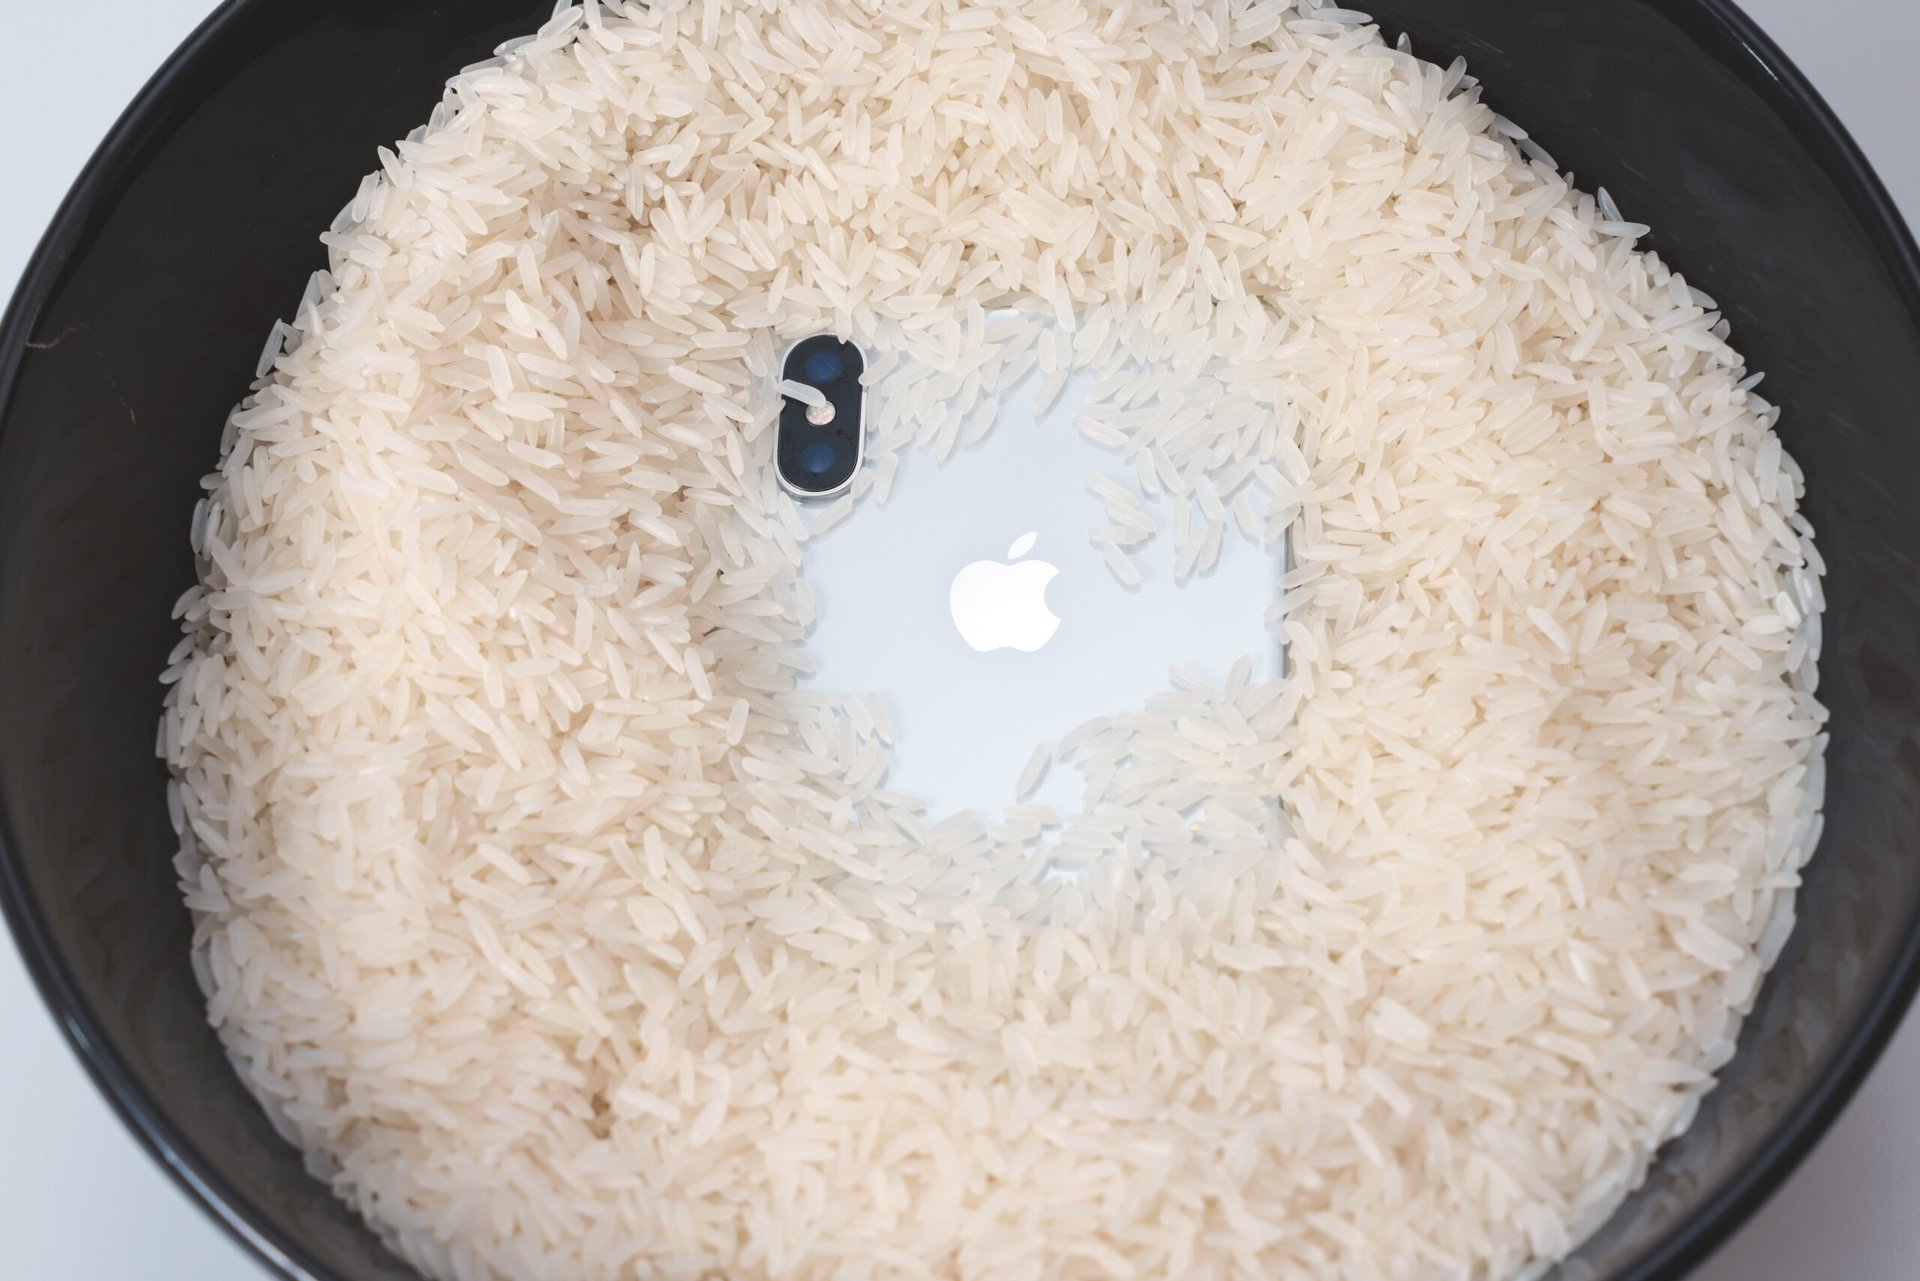 iPhone in a bowl of dry rice